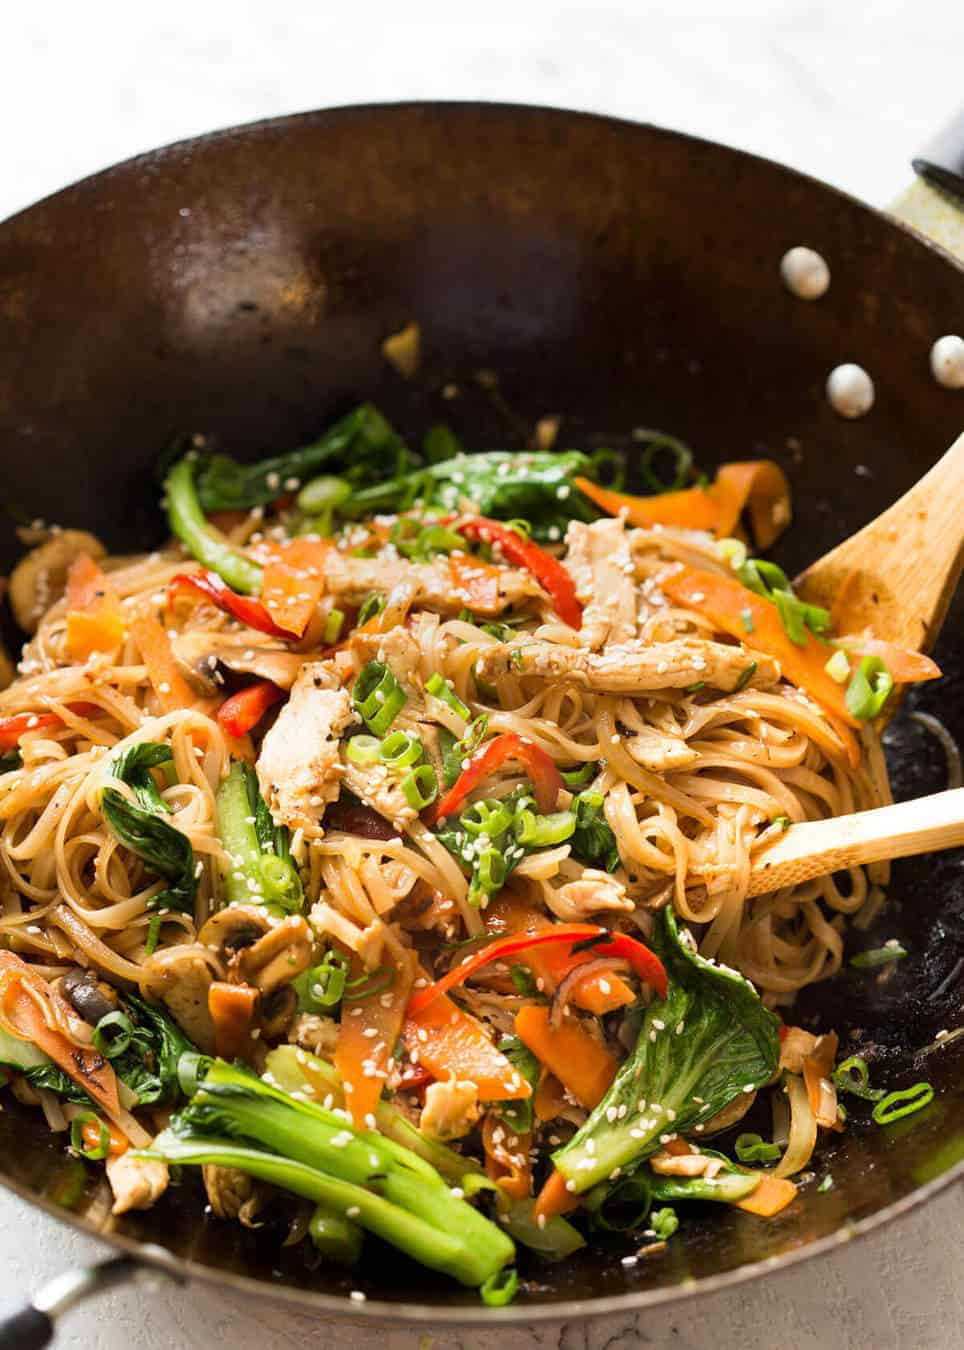 Chicken Stir Fry With Noodles
 Chicken Stir Fry with Rice Noodles